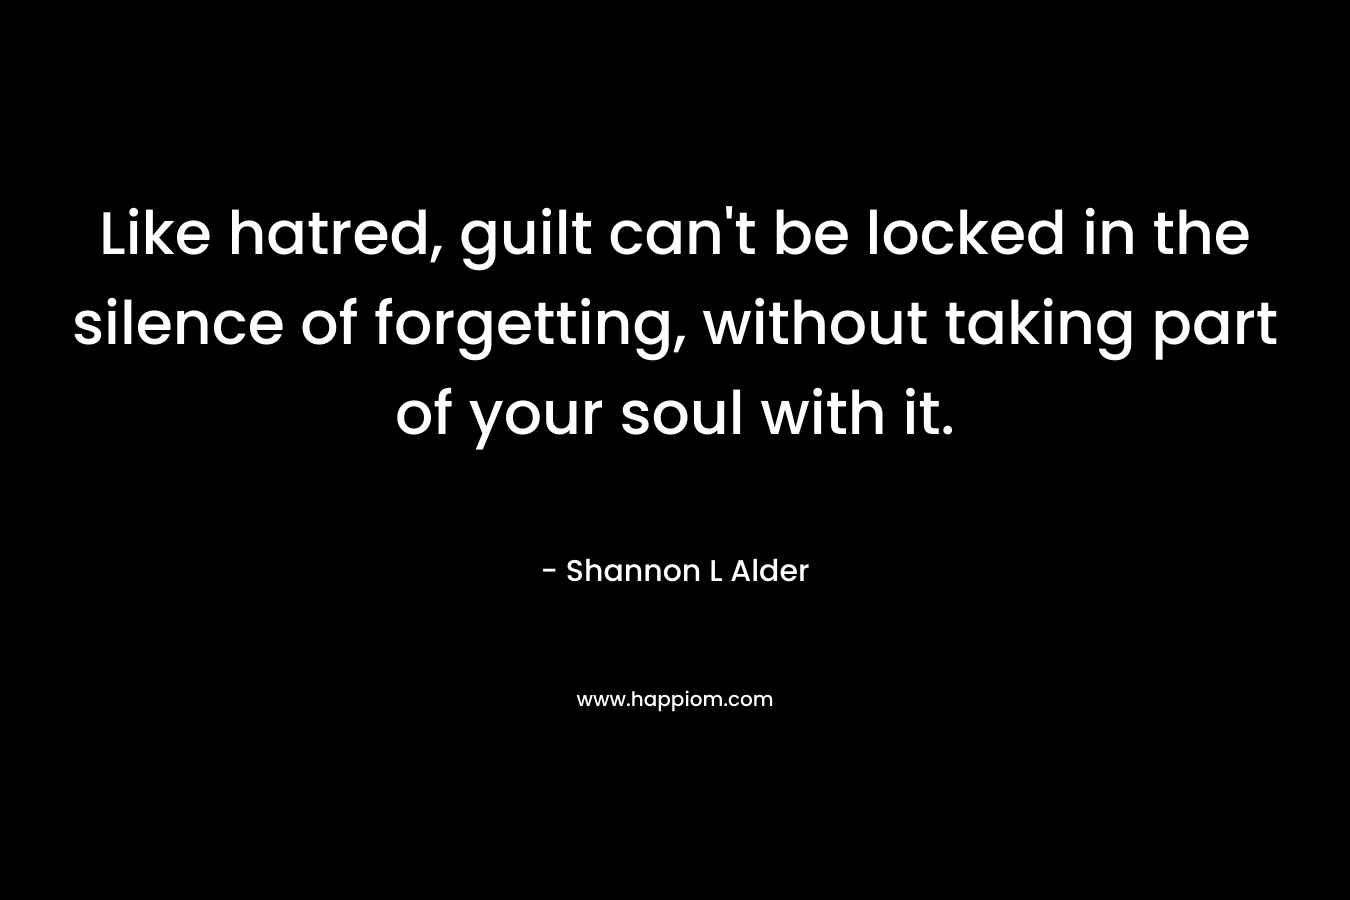 Like hatred, guilt can’t be locked in the silence of forgetting, without taking part of your soul with it. – Shannon L Alder